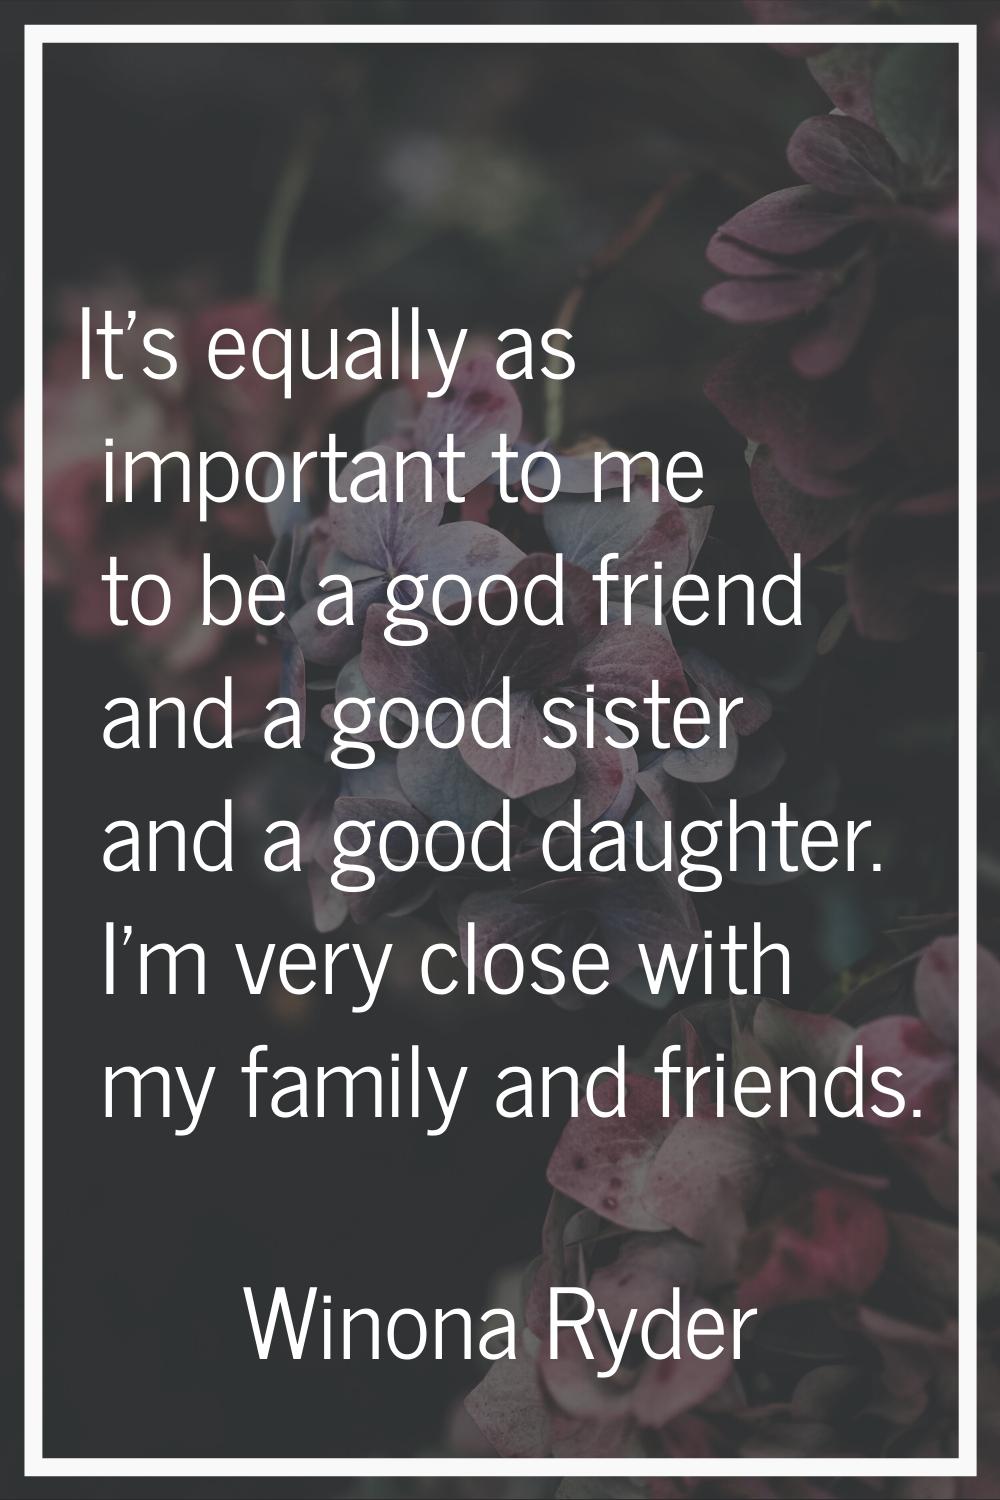 It's equally as important to me to be a good friend and a good sister and a good daughter. I'm very